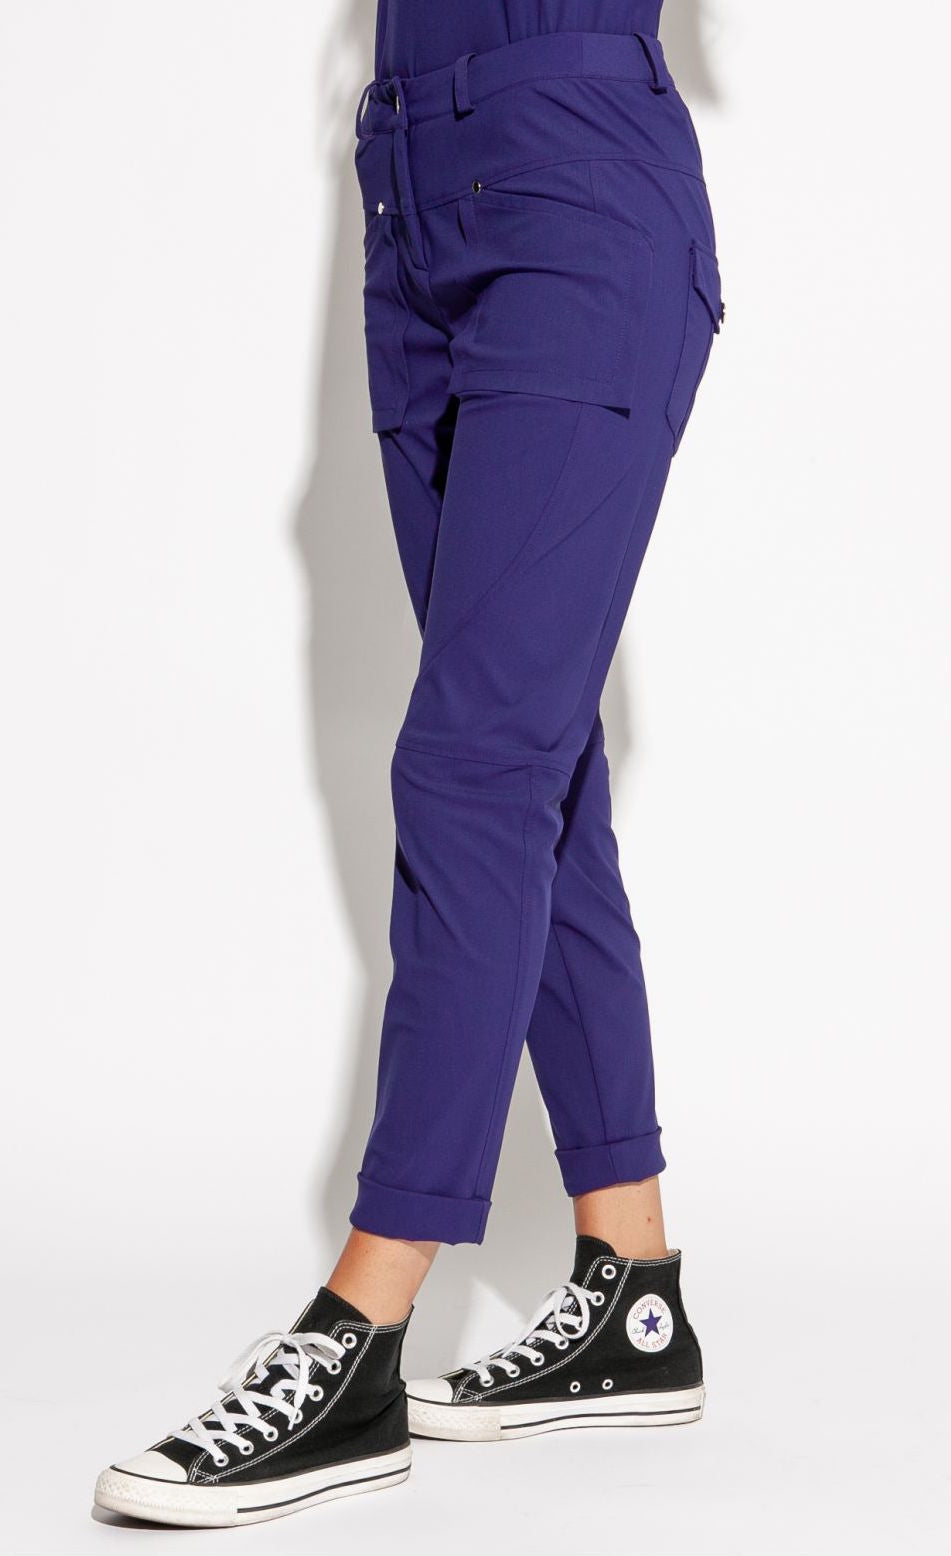 Front, left side bottom half view of a woman wearing the indies nico pant in the color indigo. This pant has two front patch pockets. The pant also has seams on the knees, back patch pockets, and a cuffed hem that ends above the ankles.